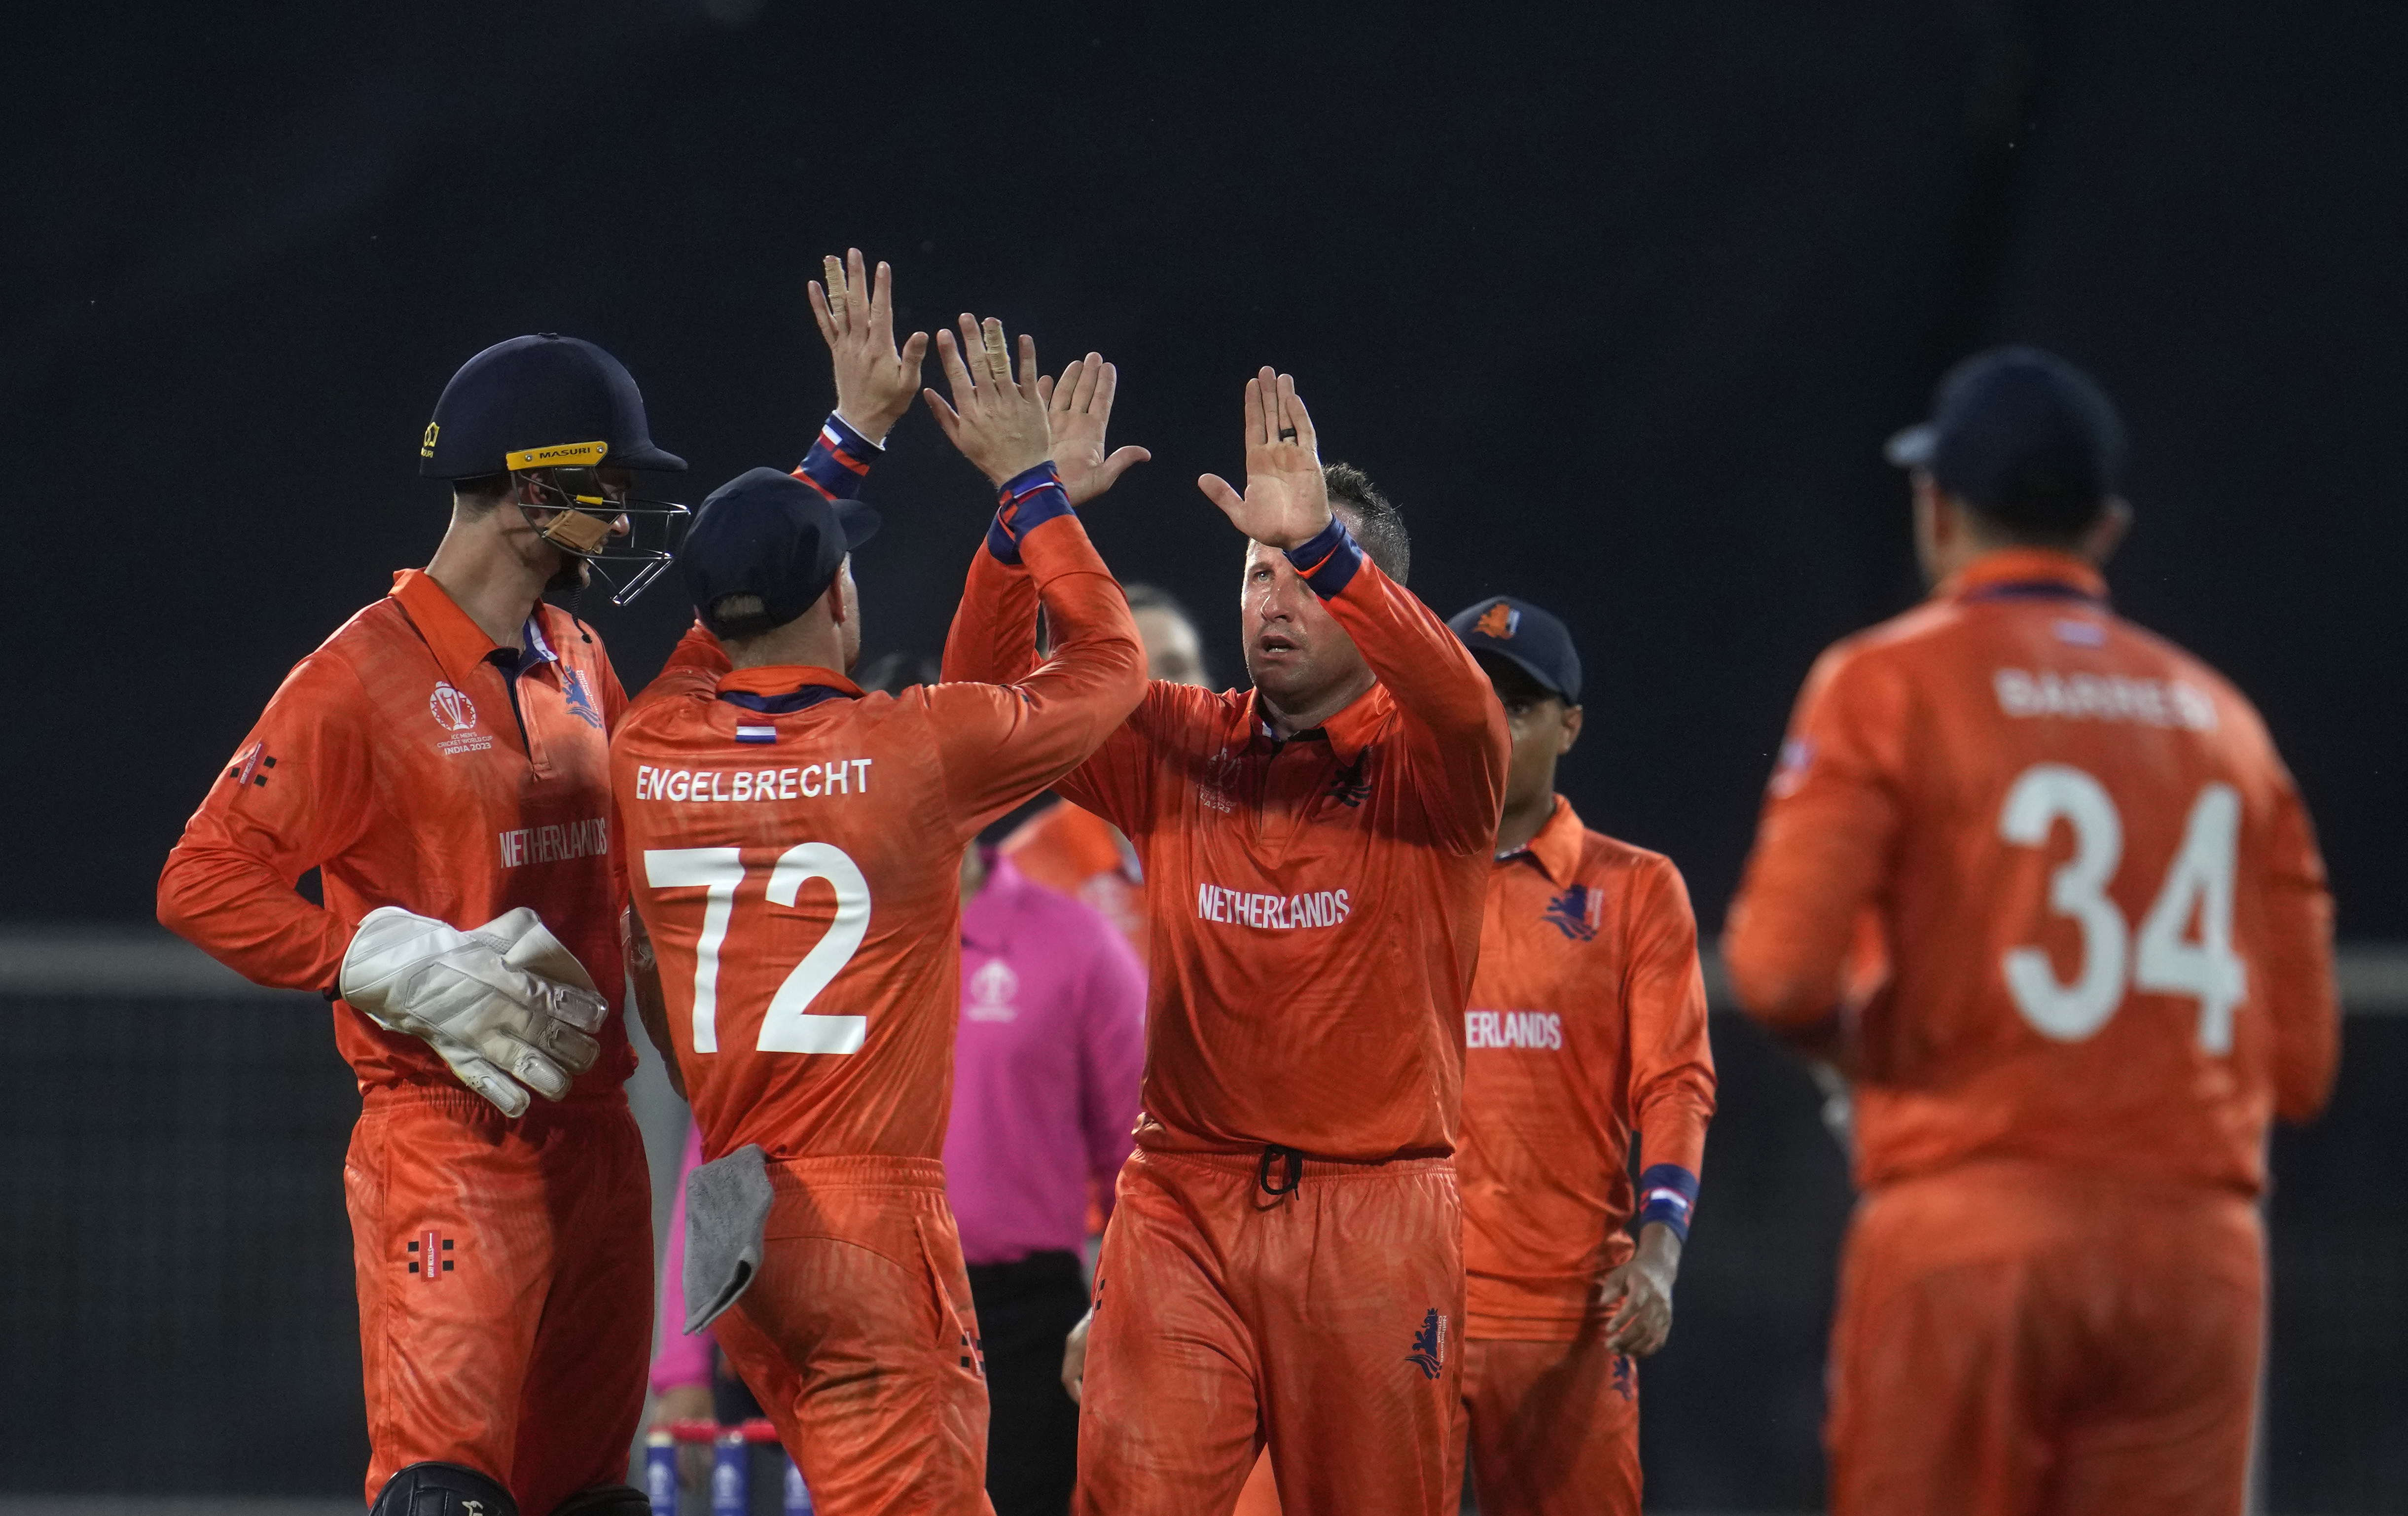 ICC World Cup 2019 jerseys ranked from worst to best